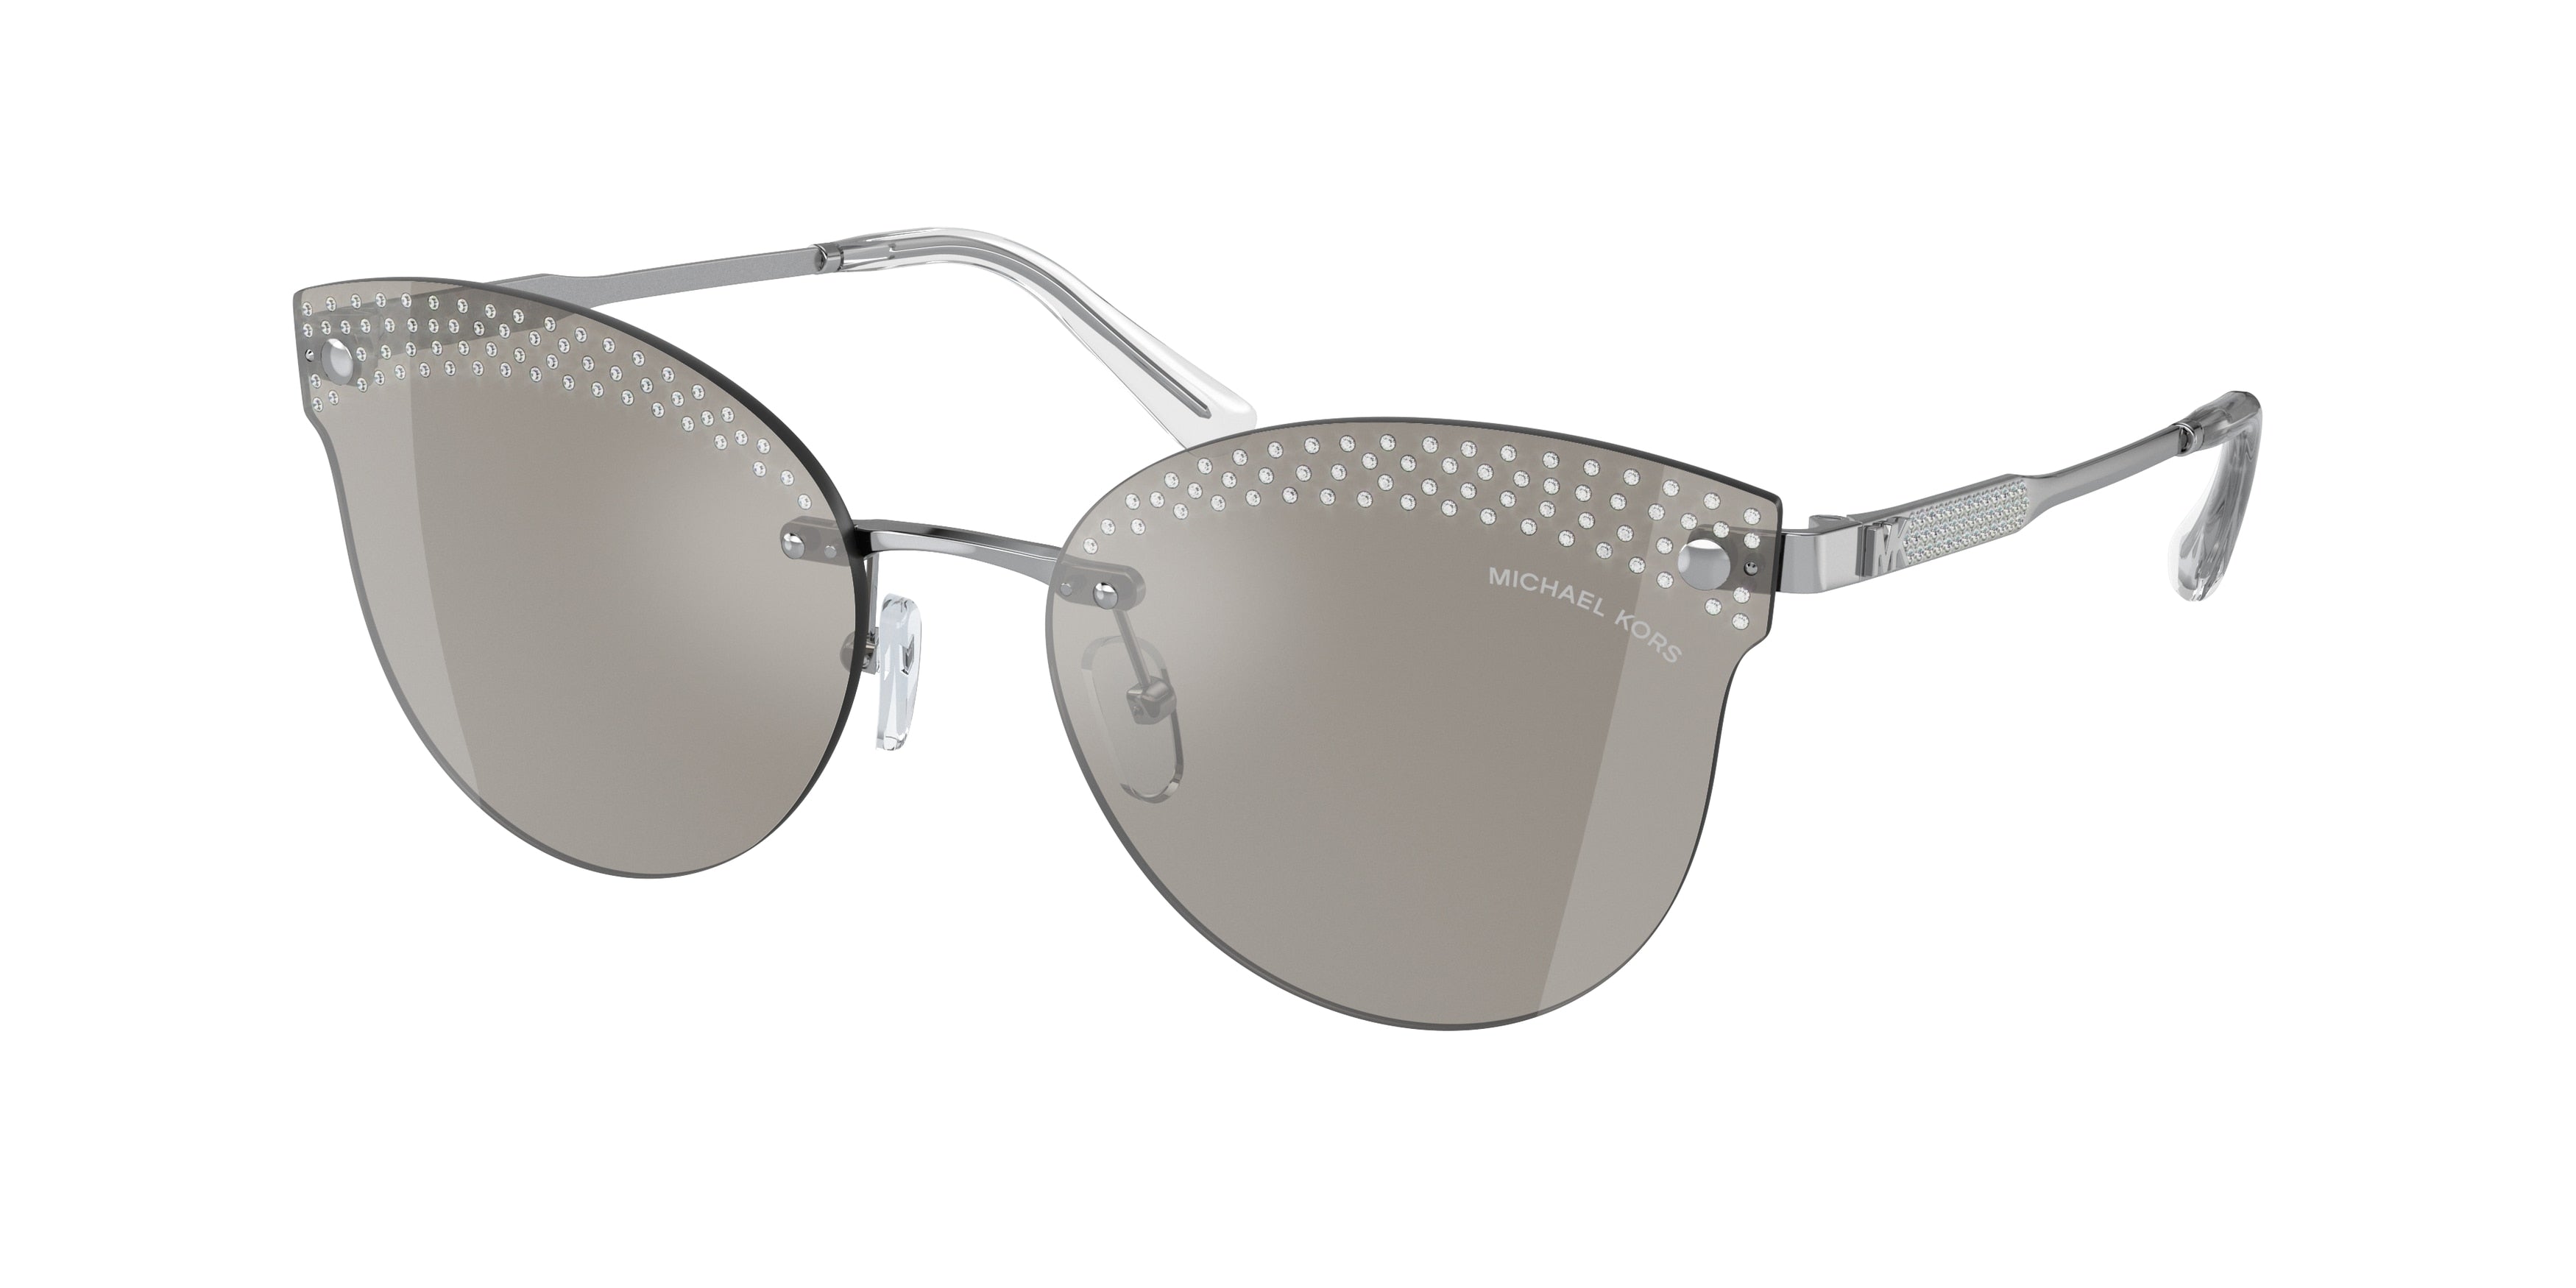 Michael Kors ASTORIA MK1130B Butterfly Sunglasses  10156G-Silver 59-140-17 - Color Map Silver